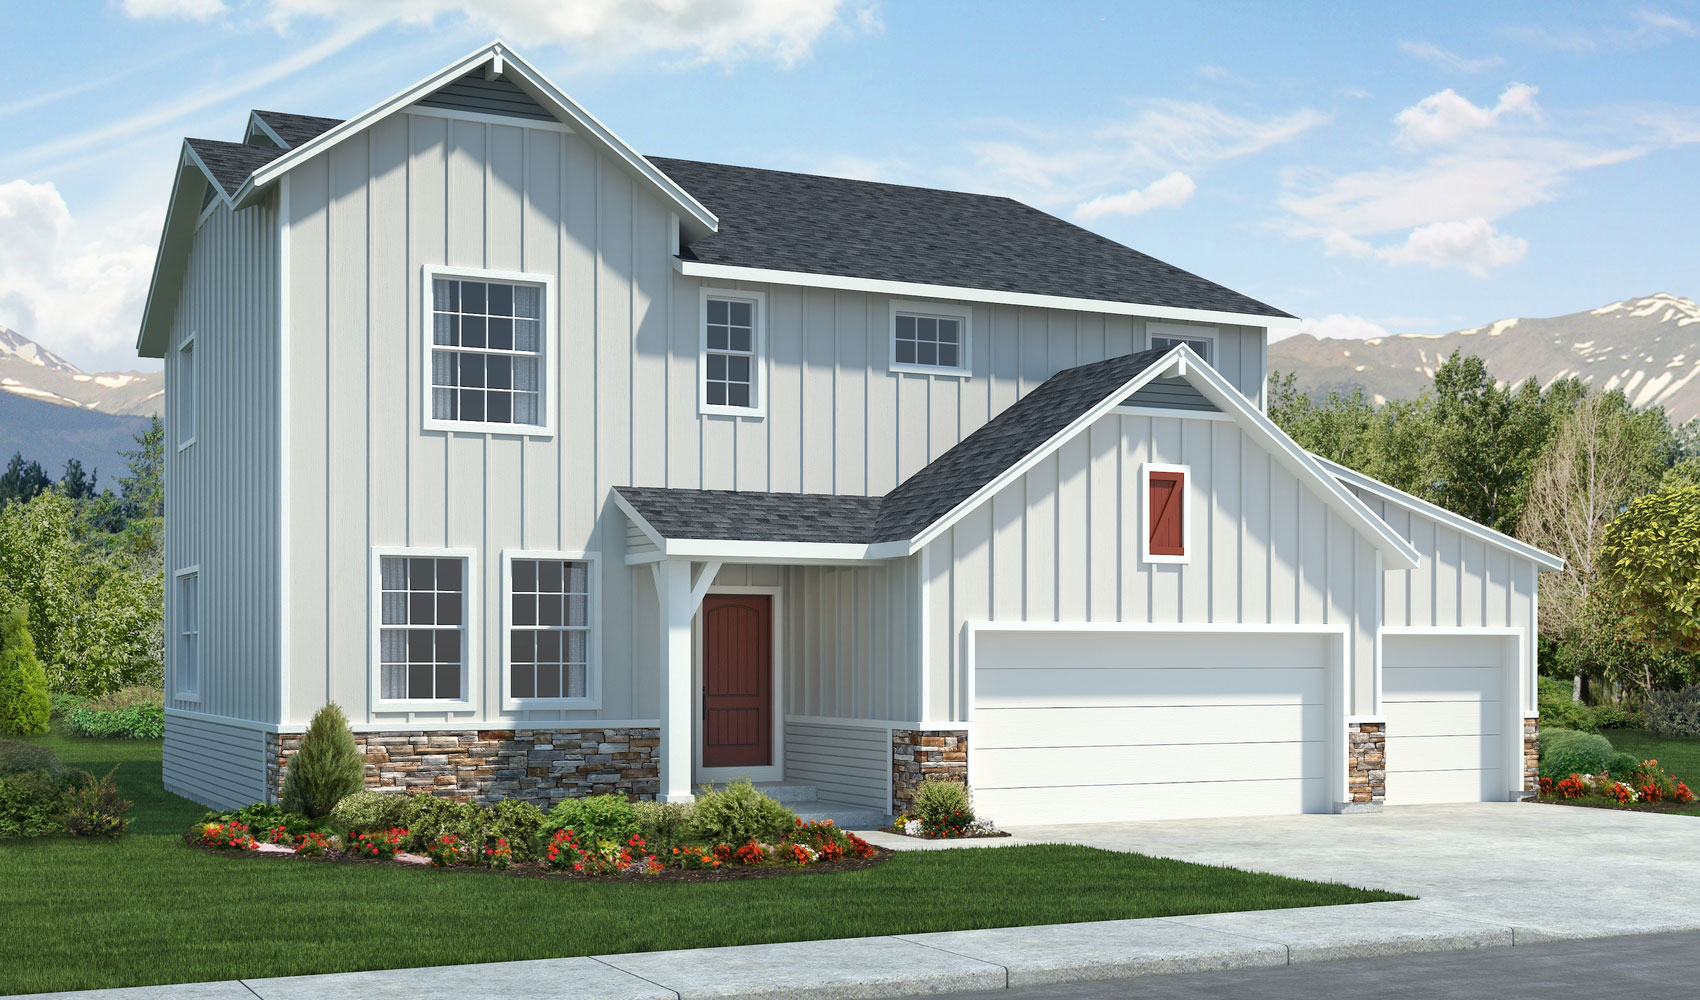 Monarch two story plan in Wolf Ranch.  Farmhouse style exterior